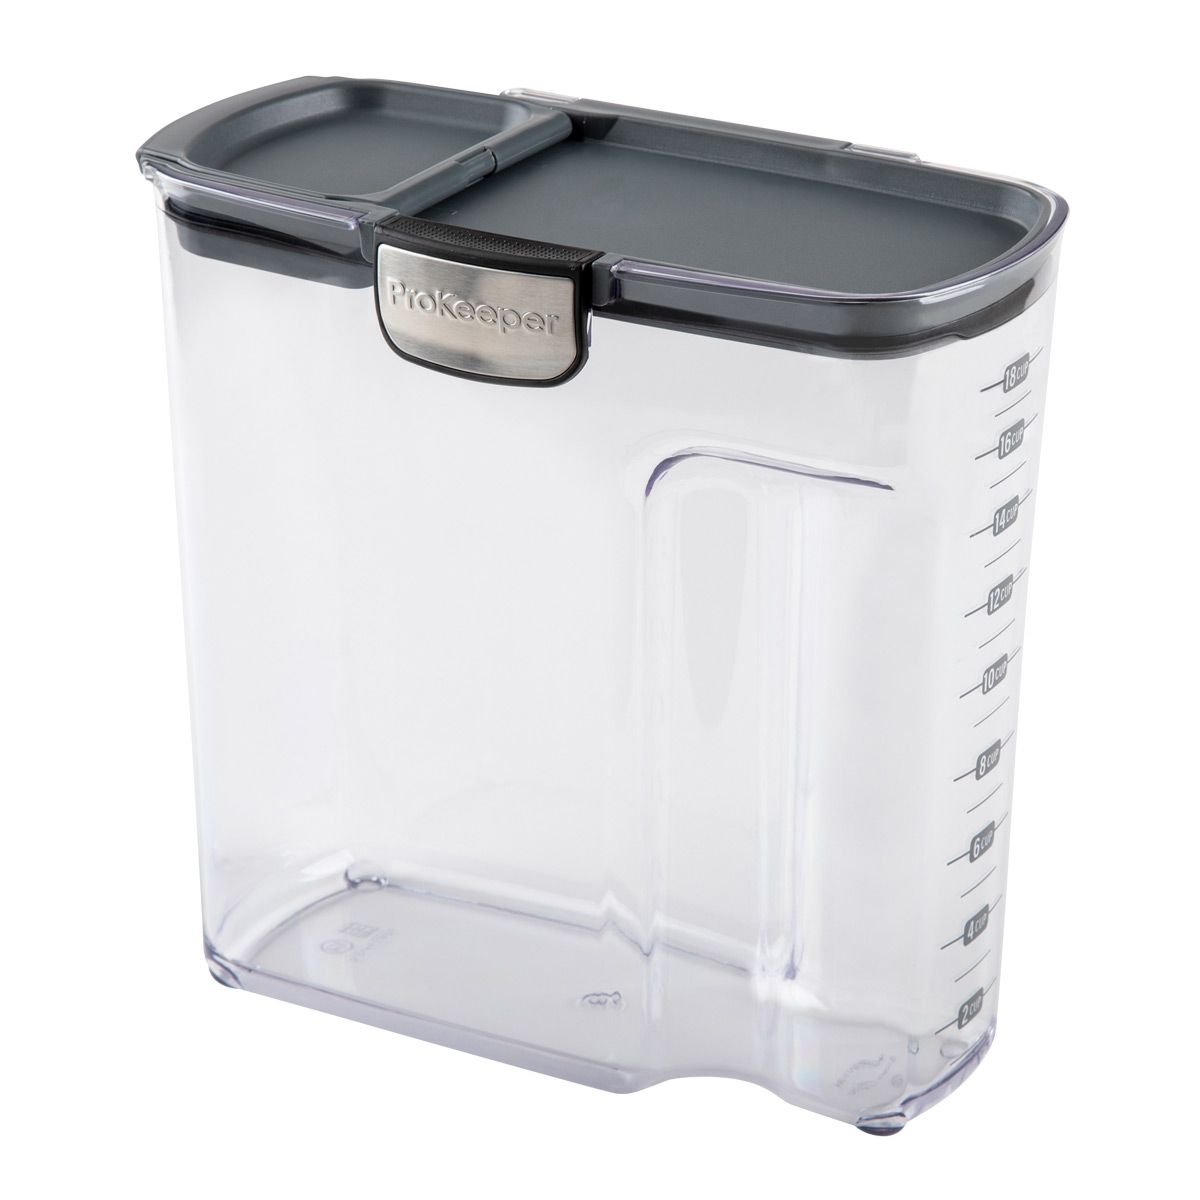 ProKeeper— 18 c. Large Cereal Dispenser | The Container Store